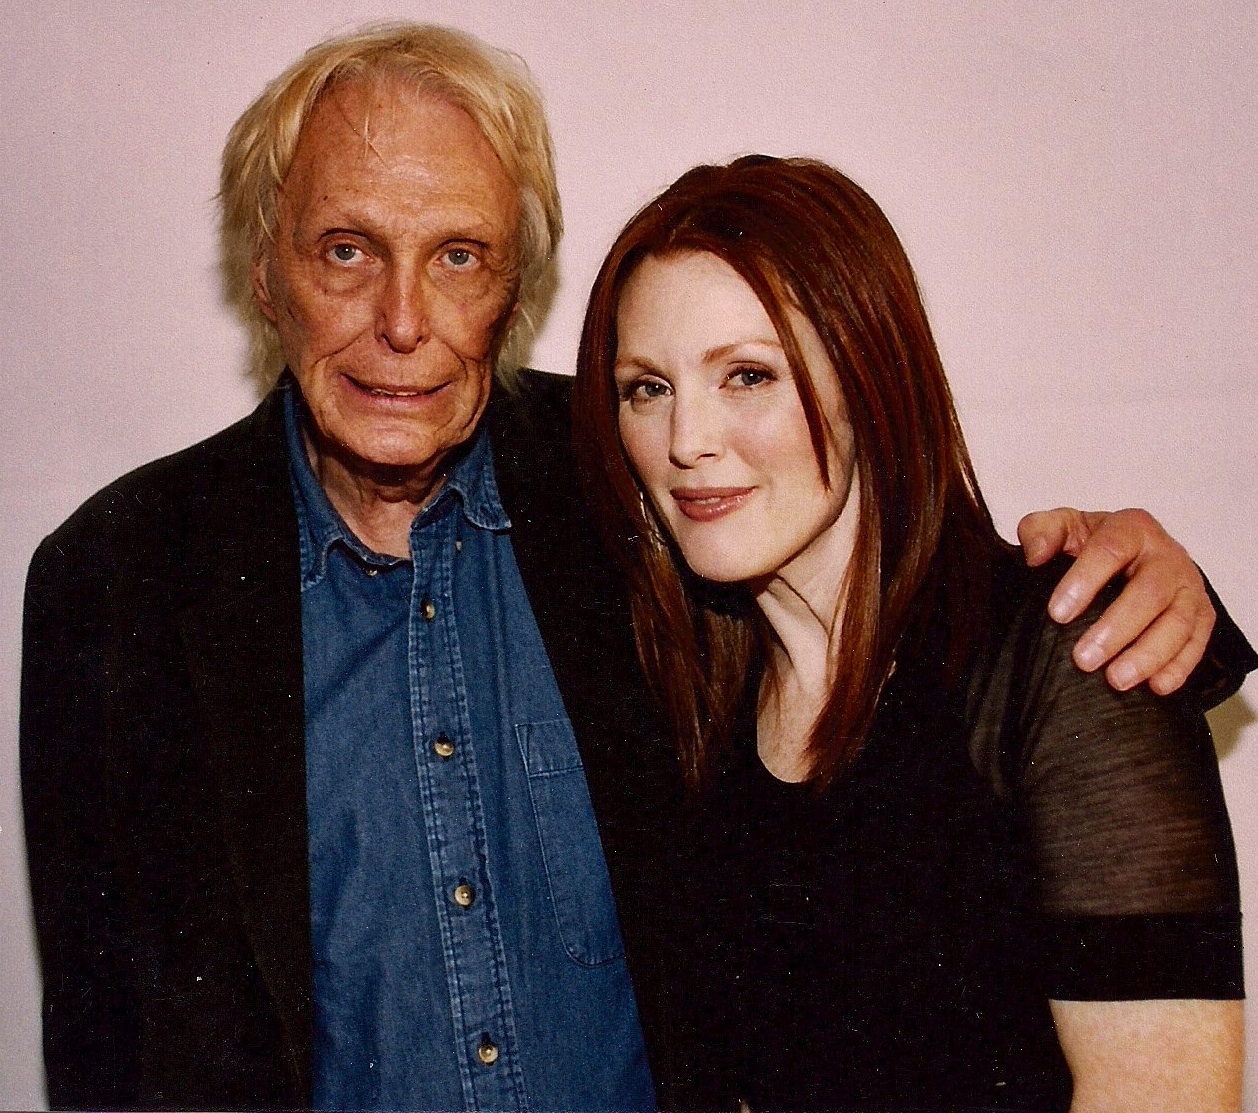 With Julianne Moore